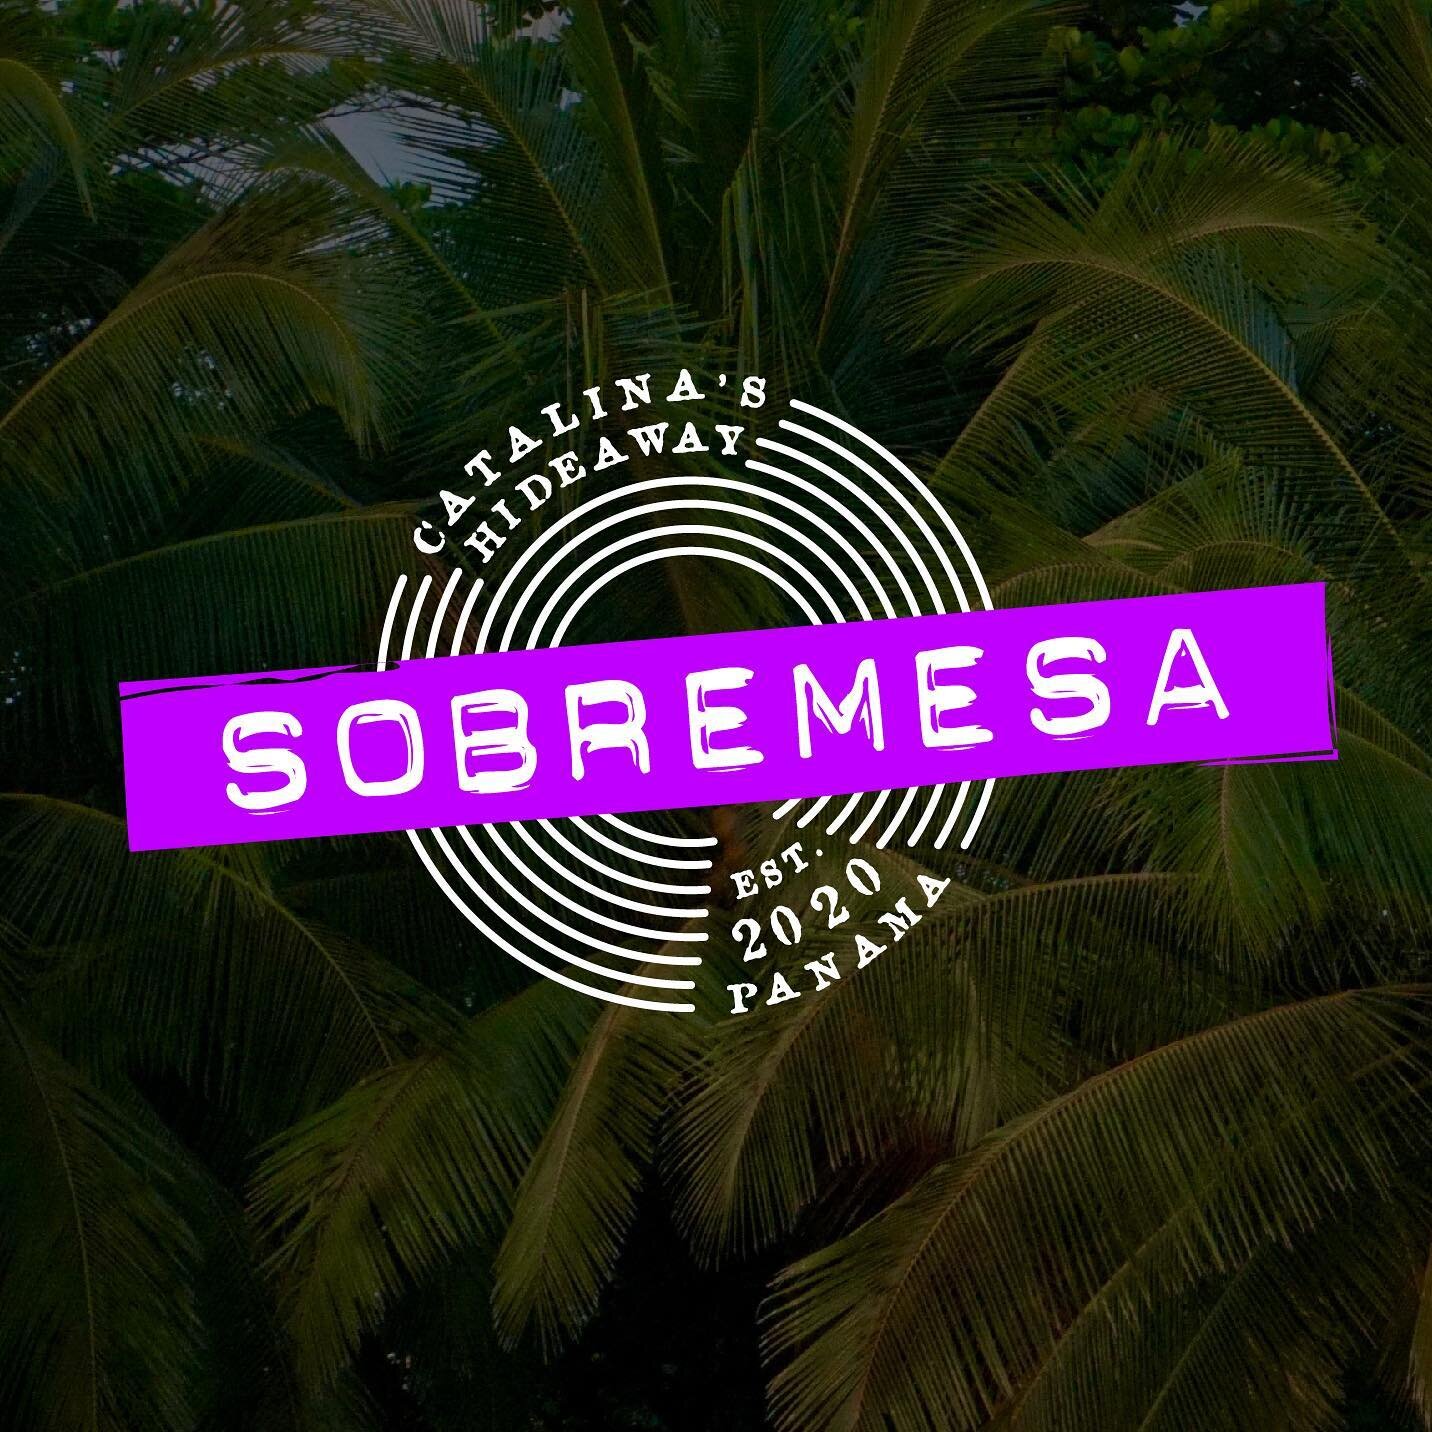 Sobremesa or &quot;over the table&quot;: (n.) refers to the time spent relaxing and conversing around the dinner table after a meal; time to digest and savour both food and friendship. 

Sobremesa is our central gathering spot devoted to serving casu